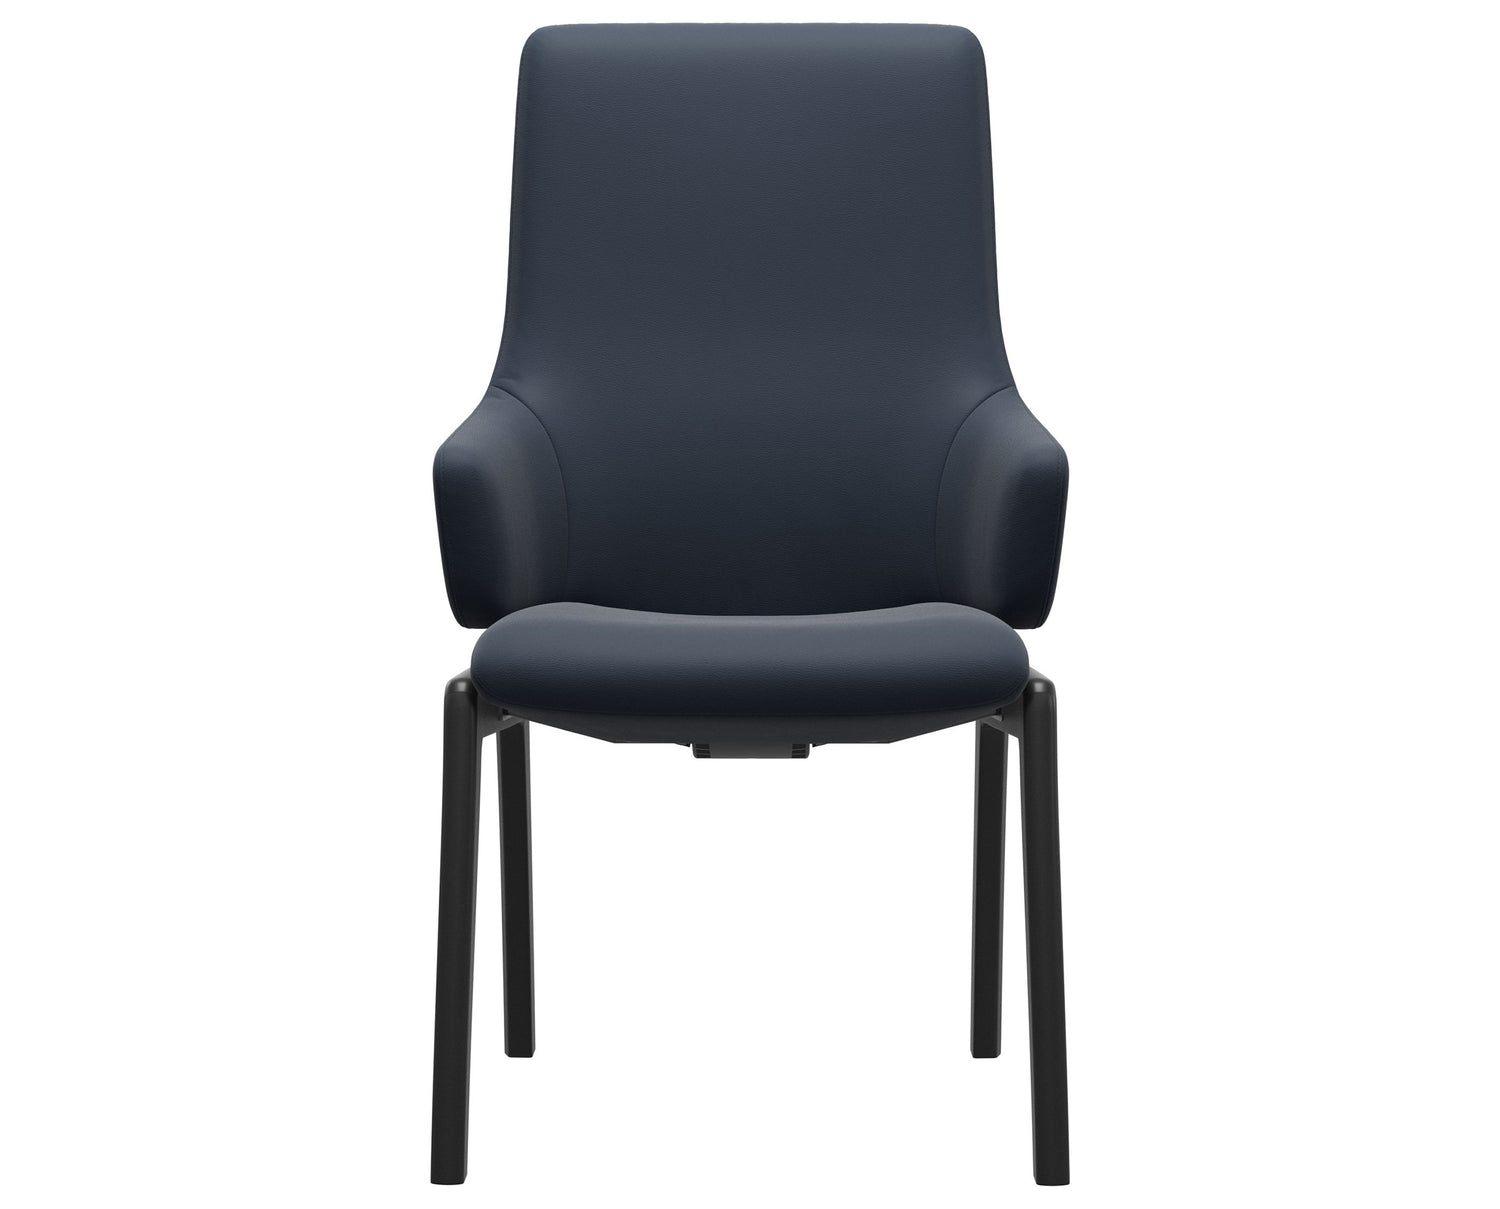 Paloma Leather Oxford Blue & Black Base | Stressless Laurel High Back D100 Dining Chair w/Arms | Valley Ridge Furniture